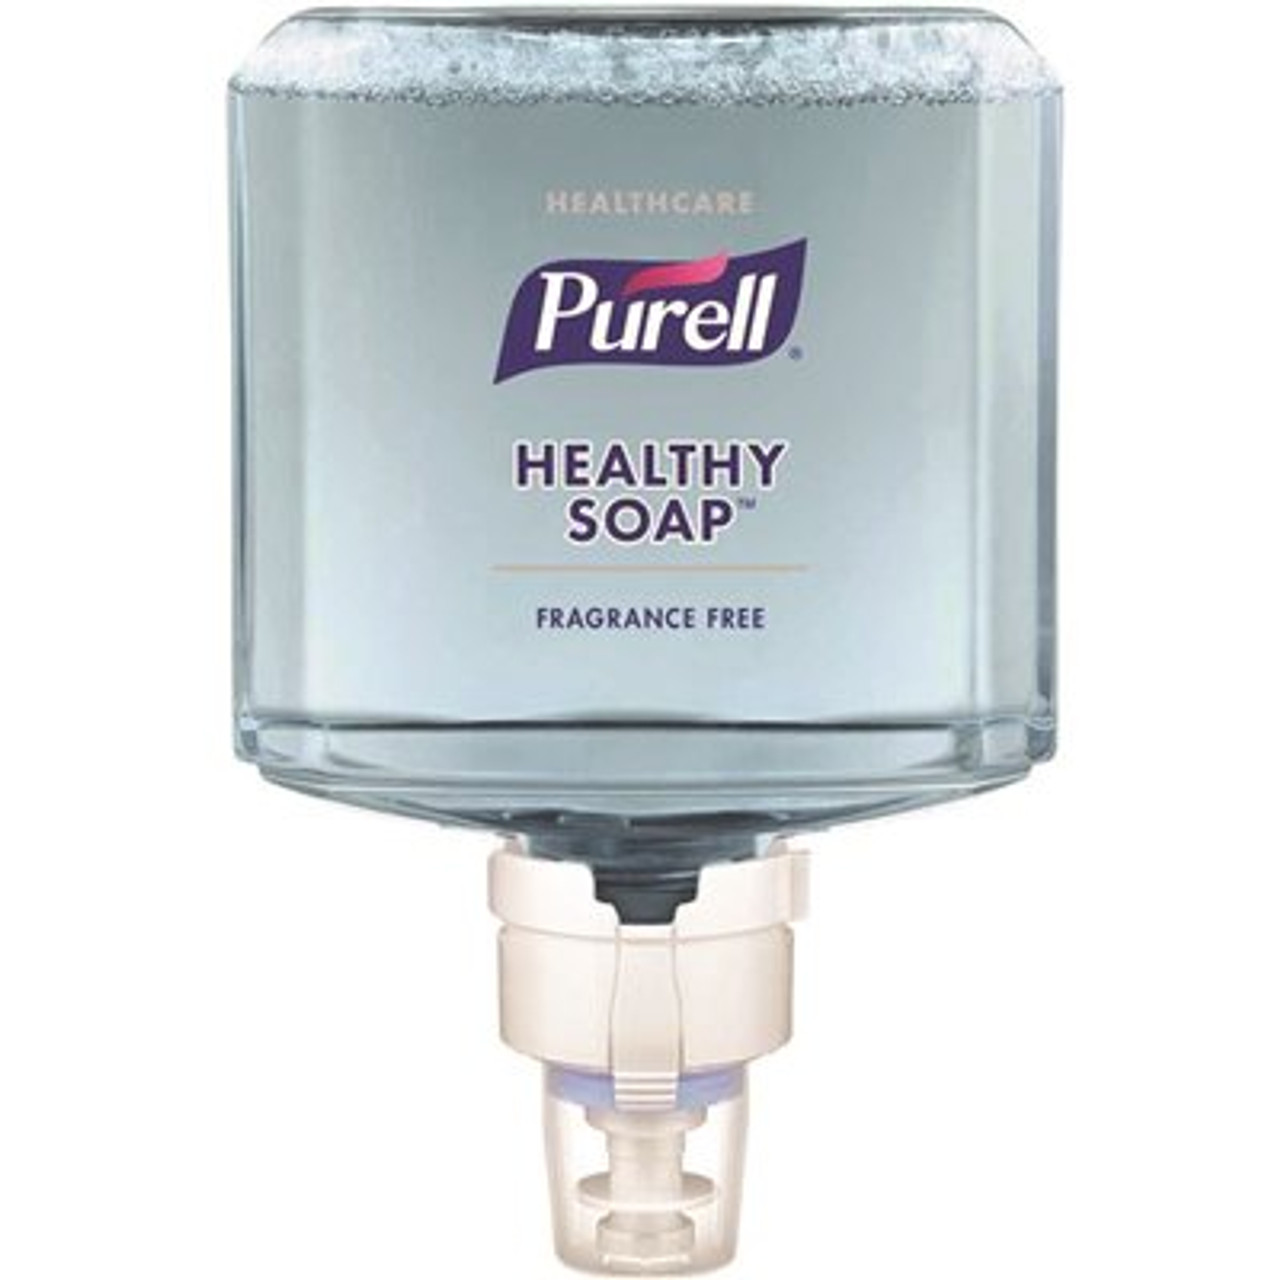 PURELL 1200 ML Healthcare Healthy Soap Gentle And Free Foam ES8 Refill Case Of 2